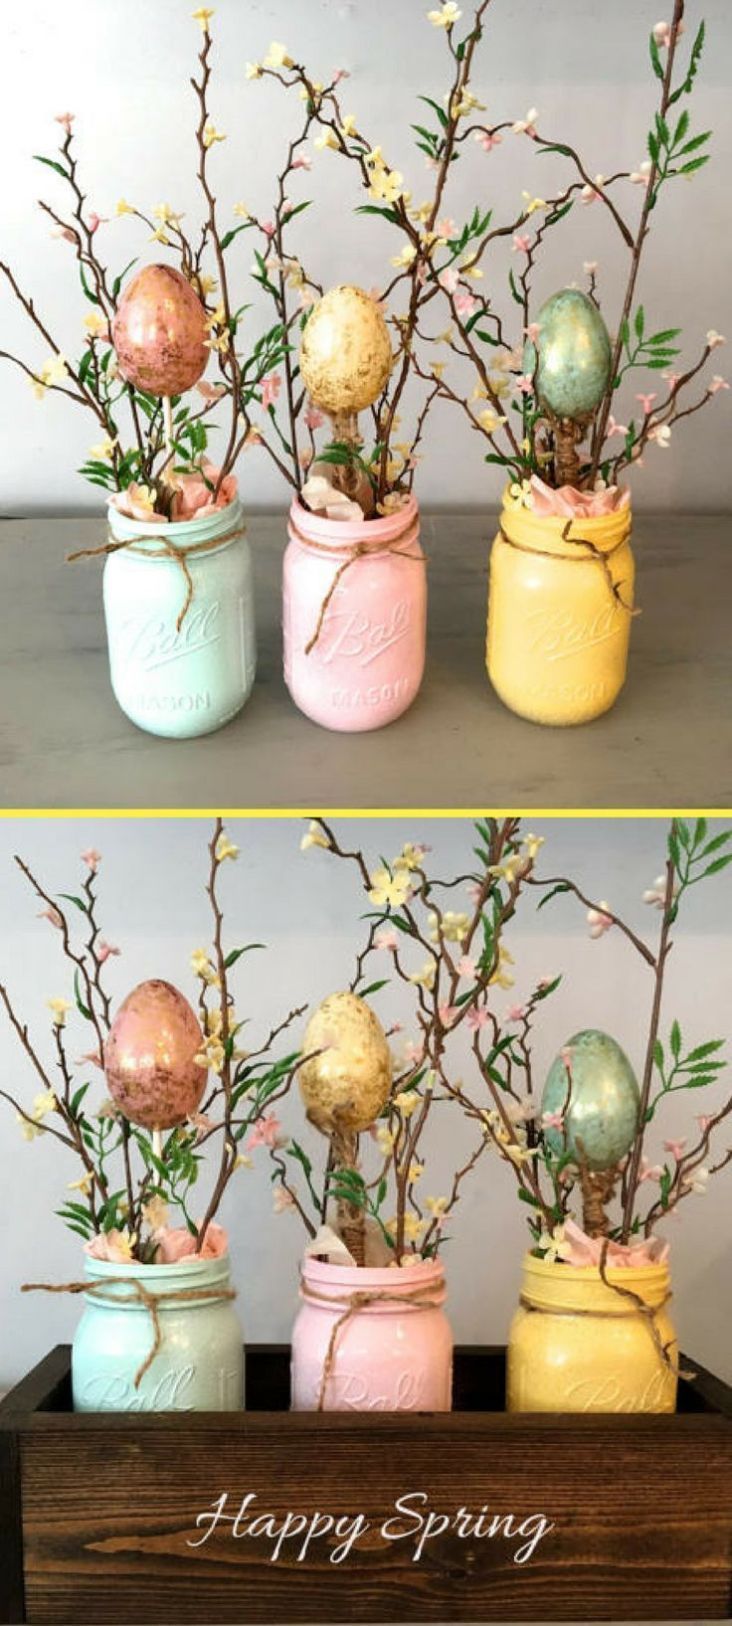 19 holiday Decorations easter ideas